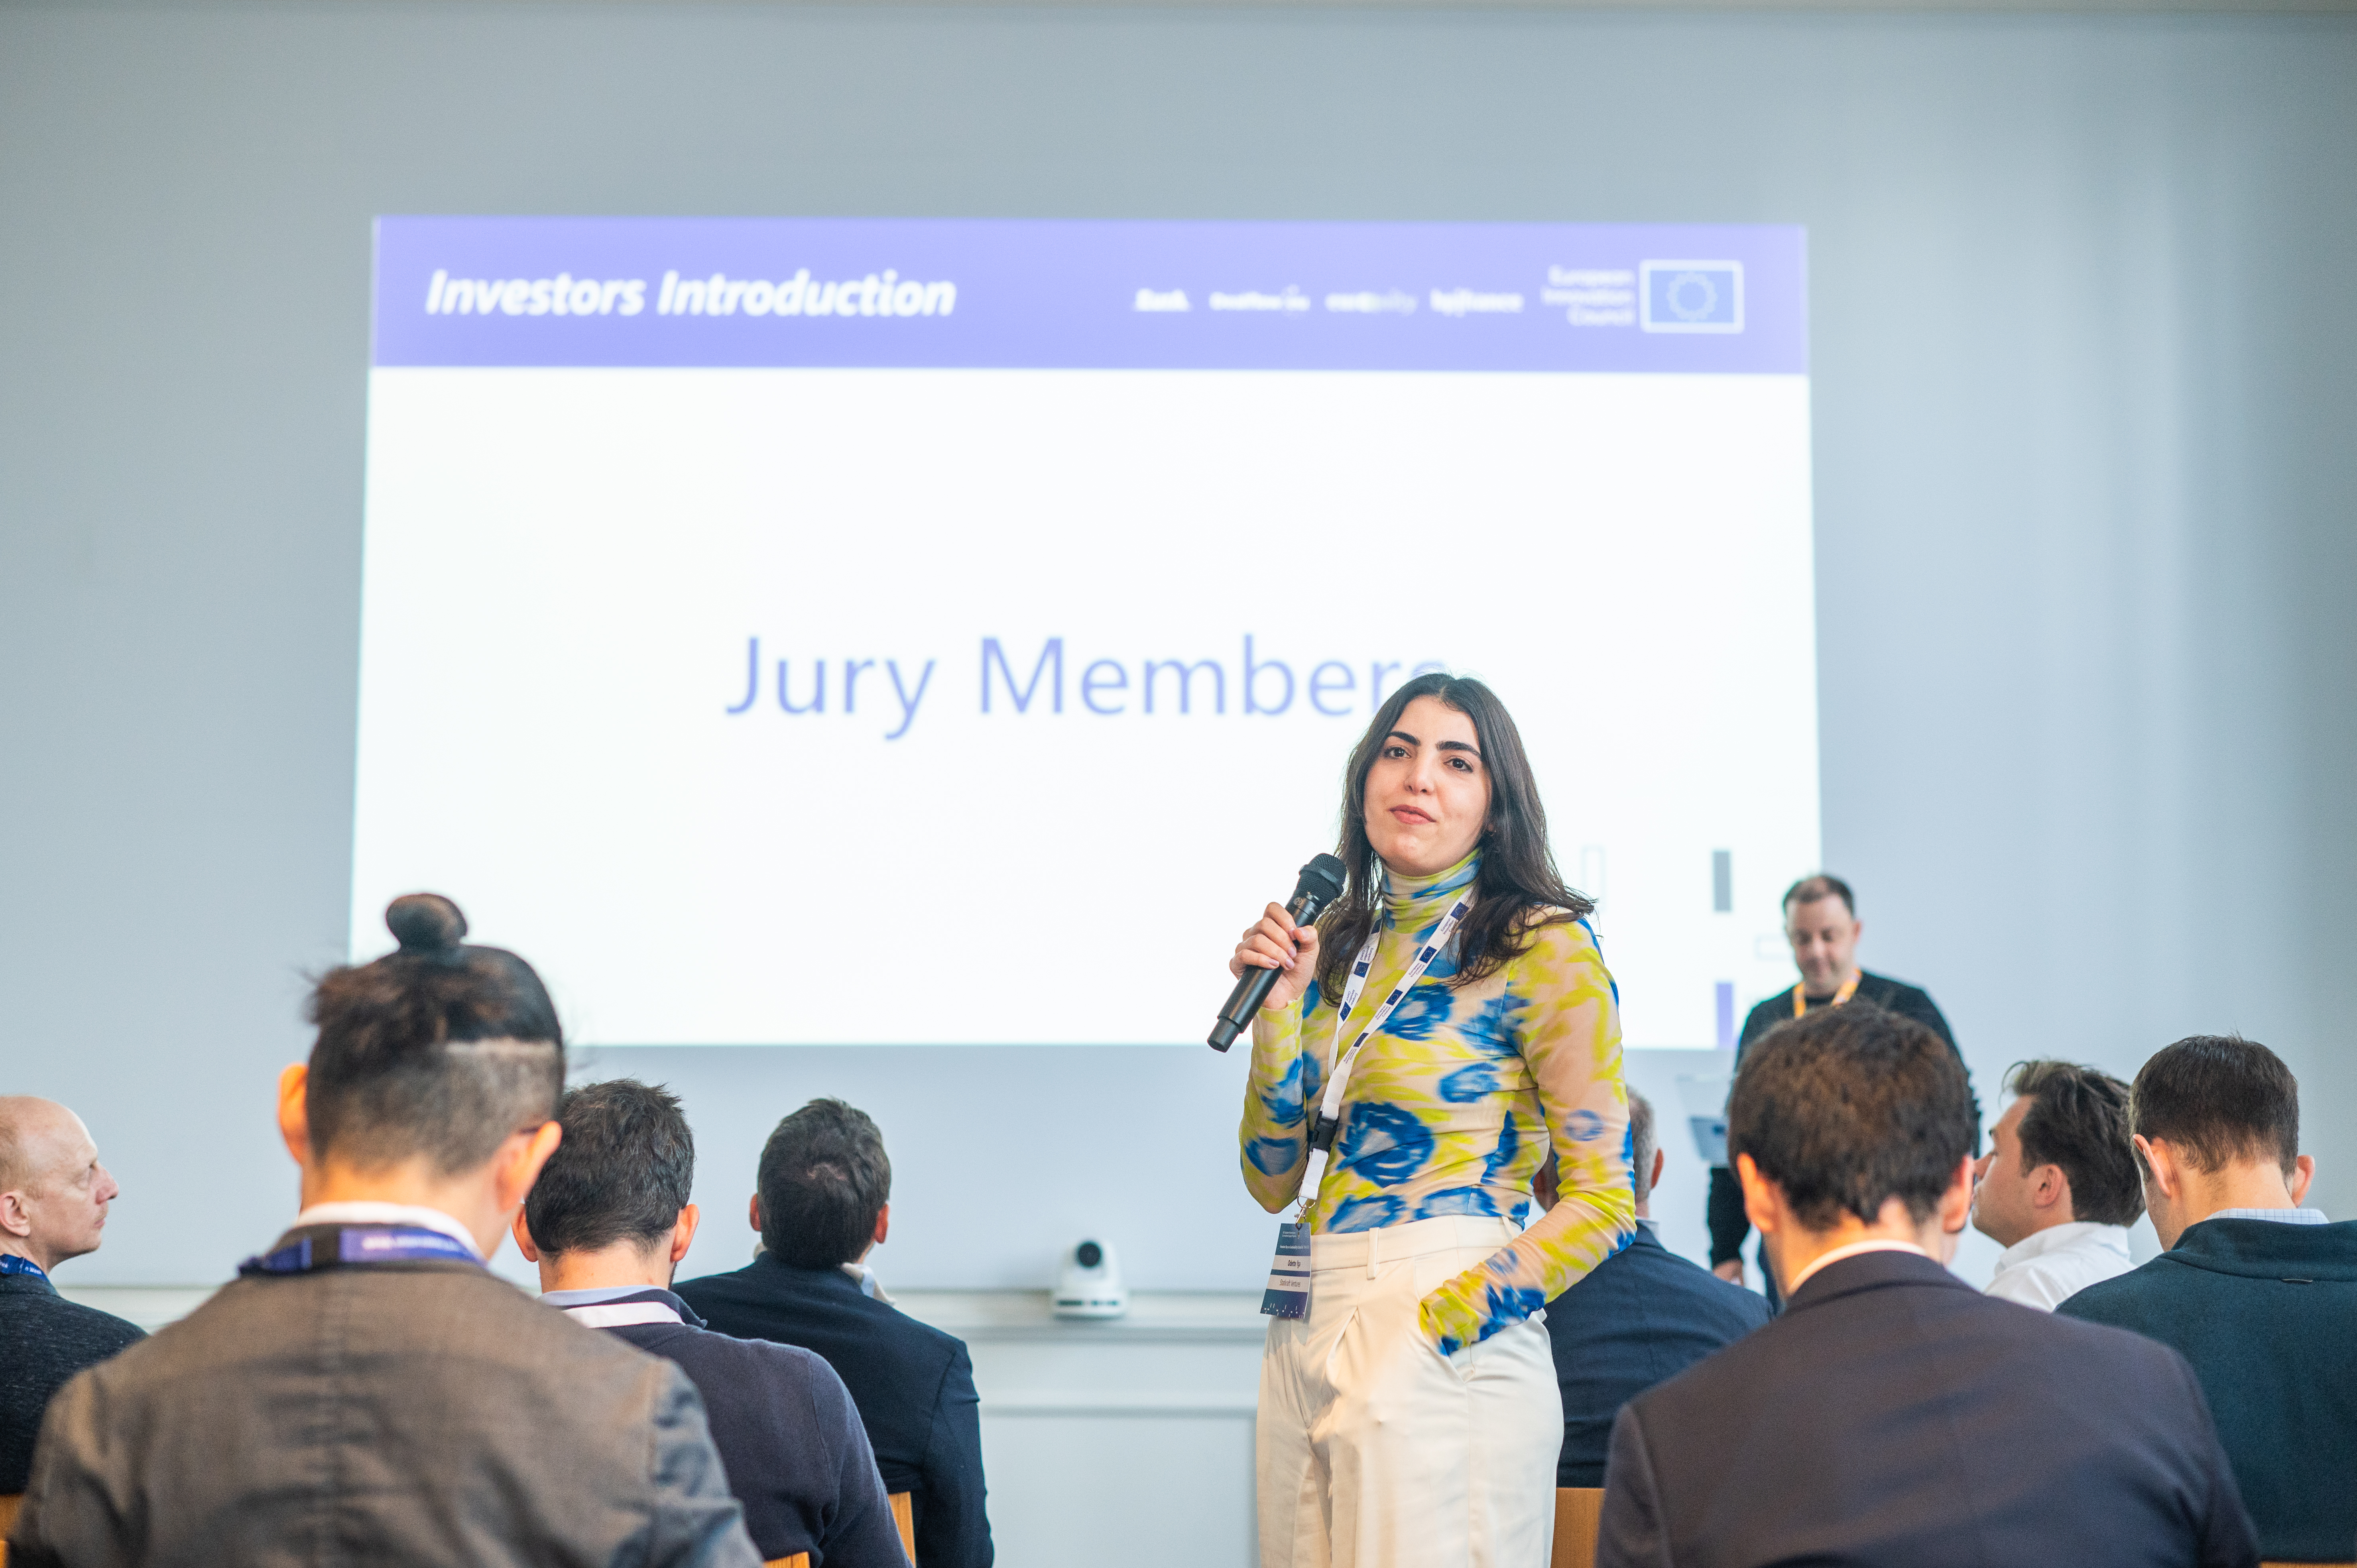 Odette Yga, jury investor at the event, during the jury presentation.